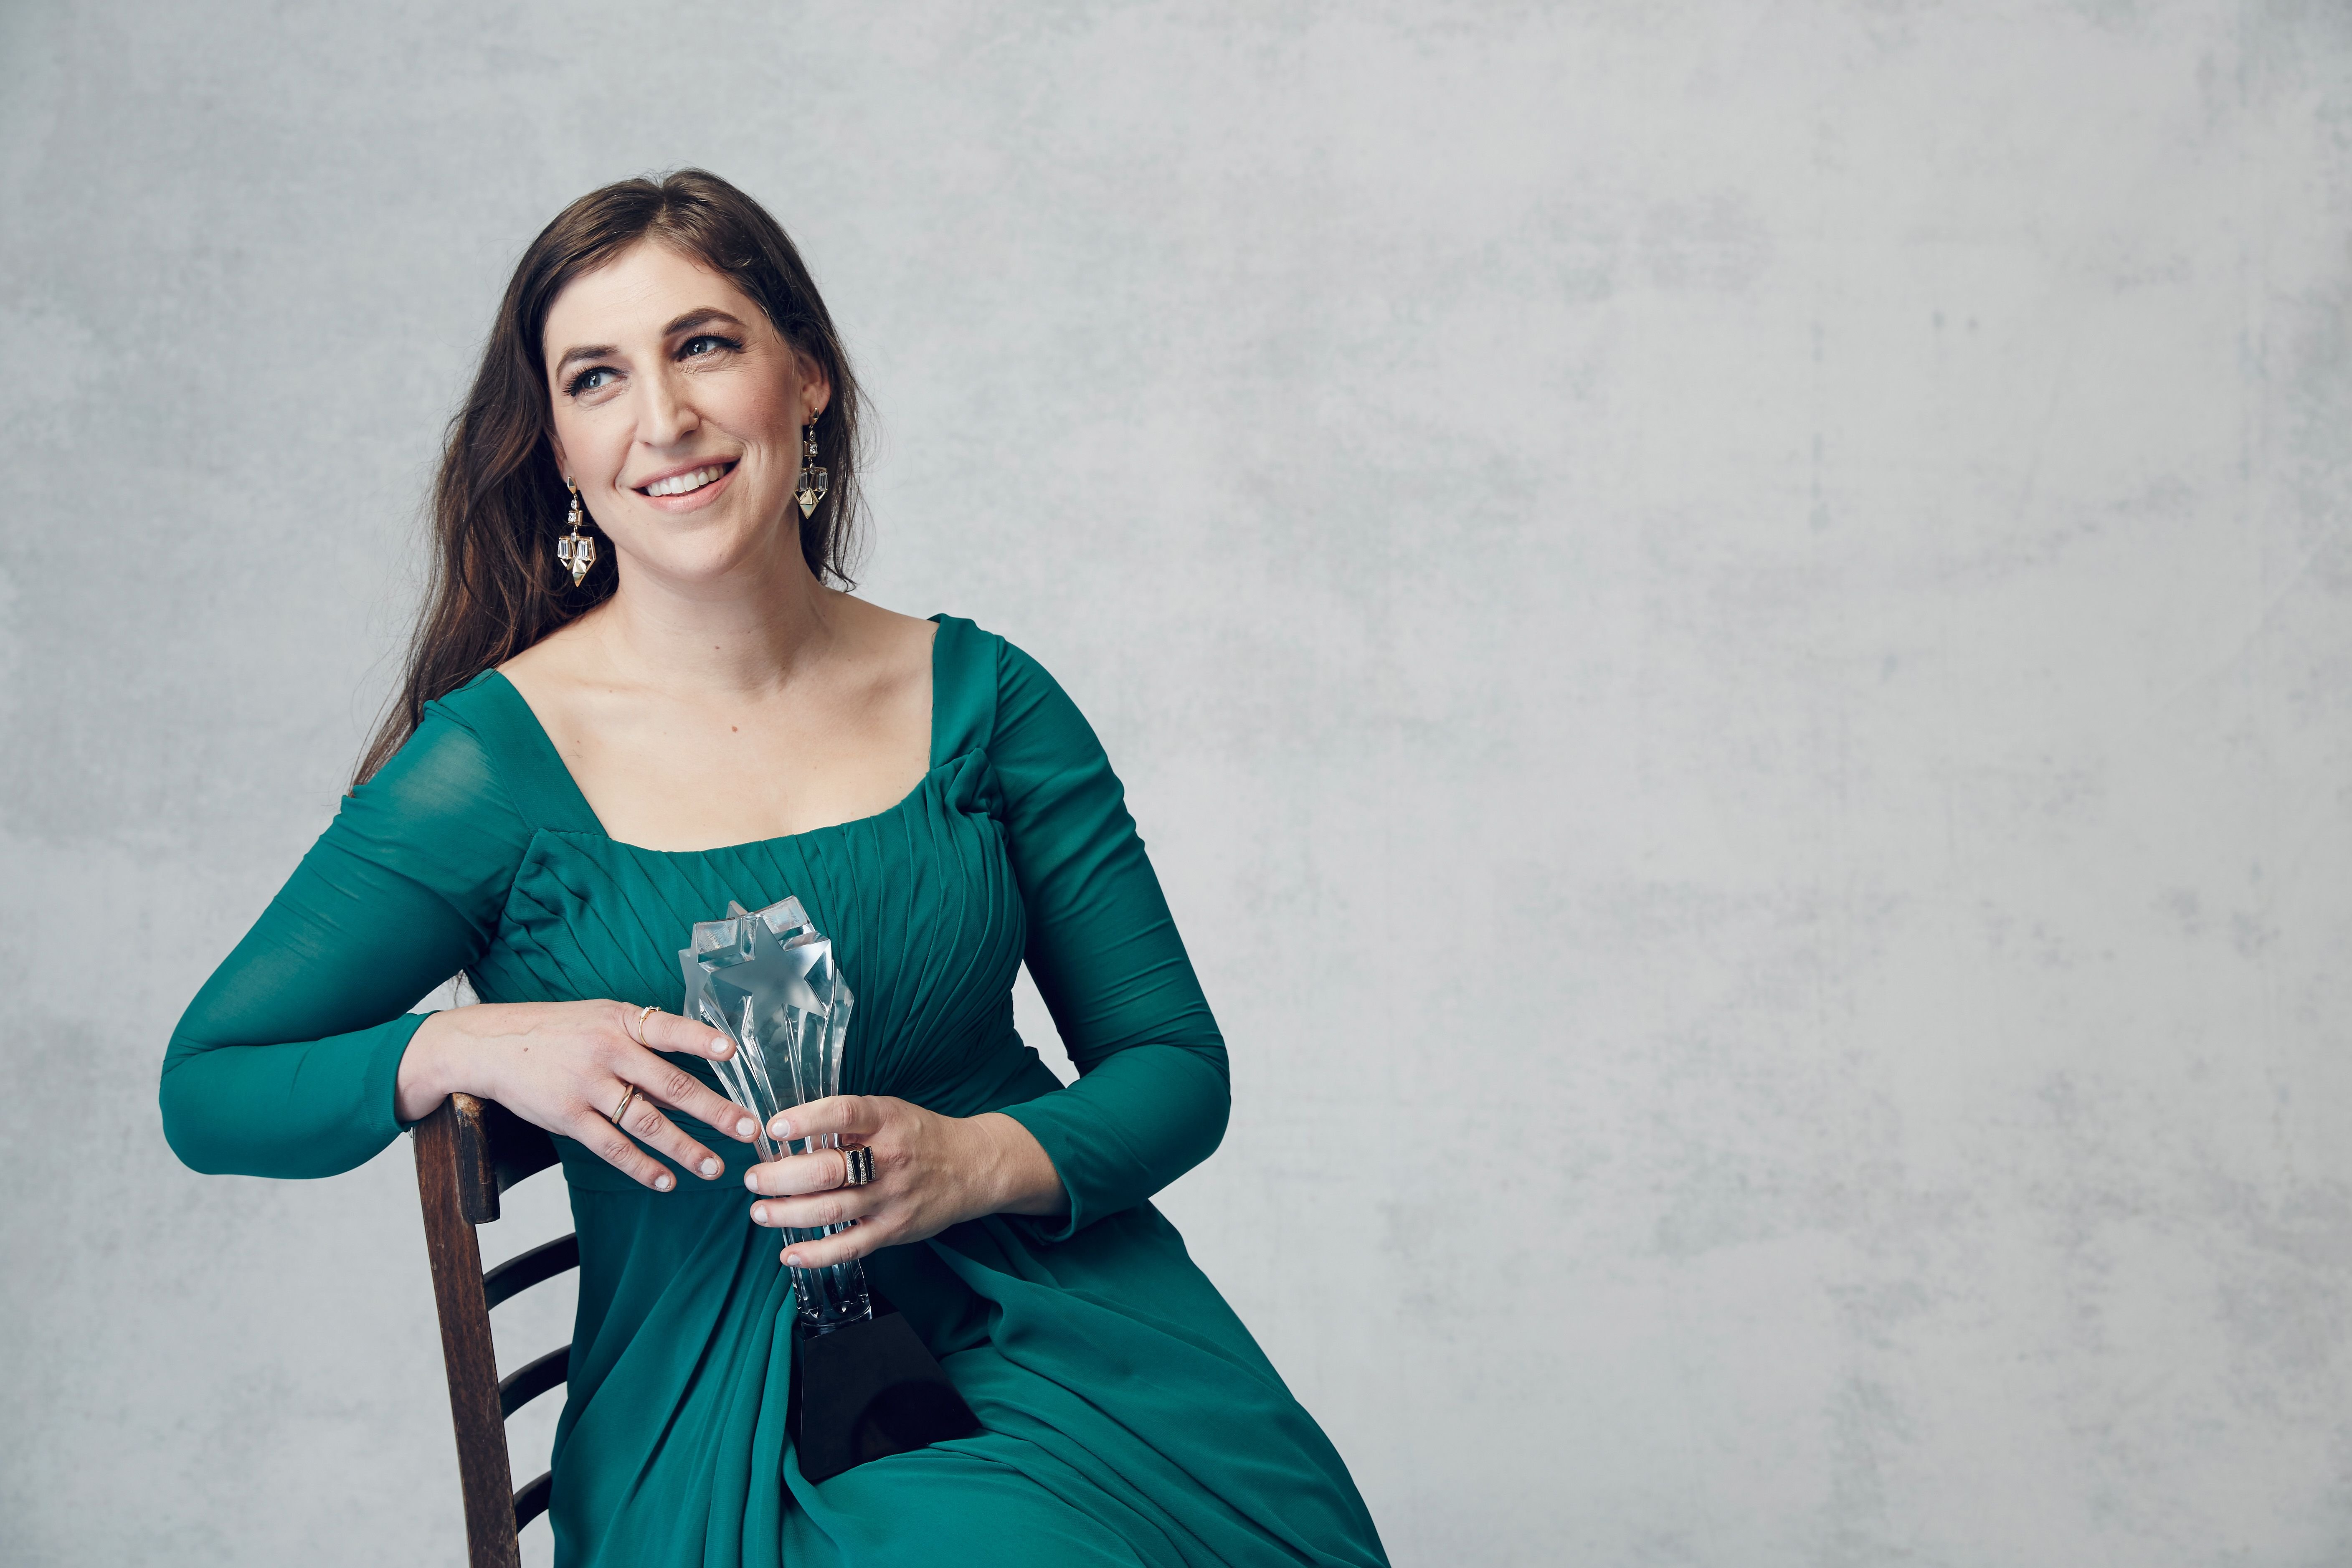 Mayim Bialik poses for a portrait during the 21st Annual Critics' Choice Awards on January 17, 2016. | Photo: Getty Images